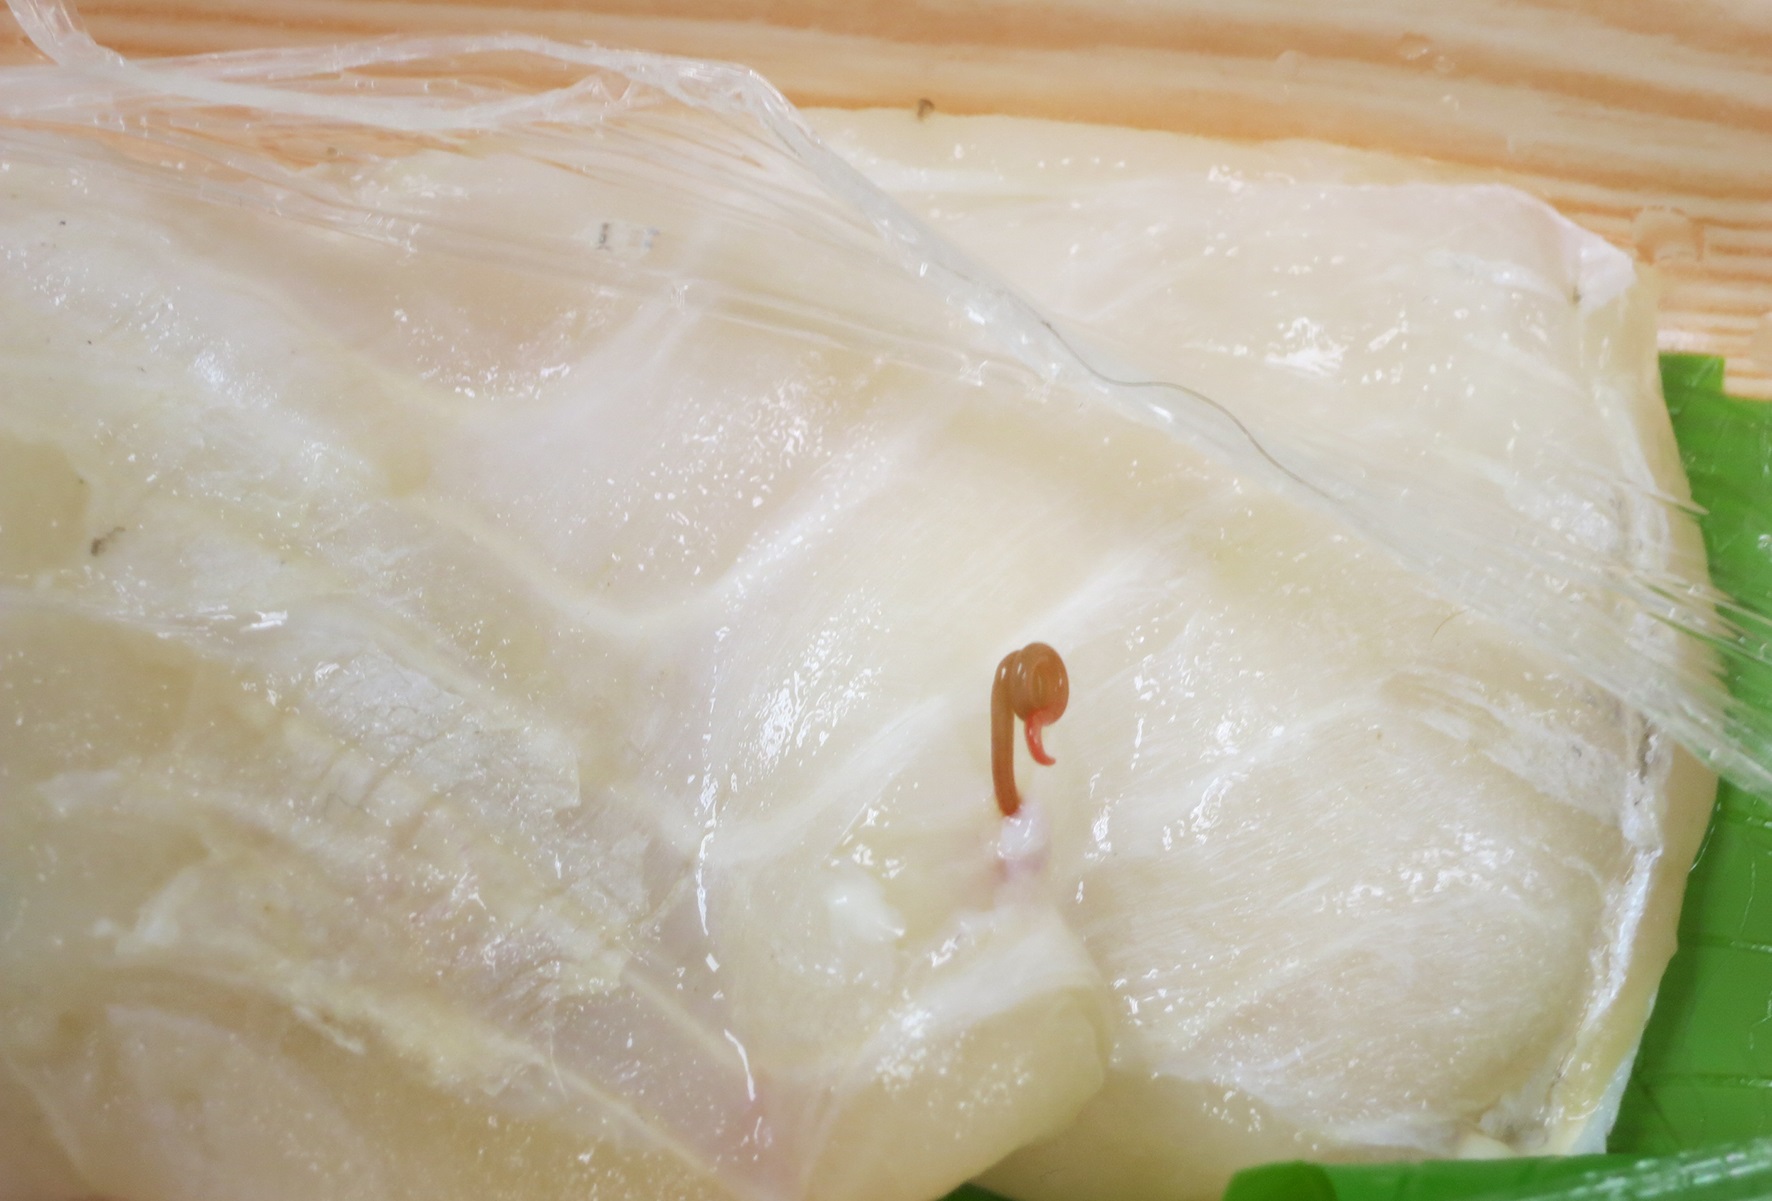 Figure 3: Raw fish found with a suspected parasite in a food complaint case.